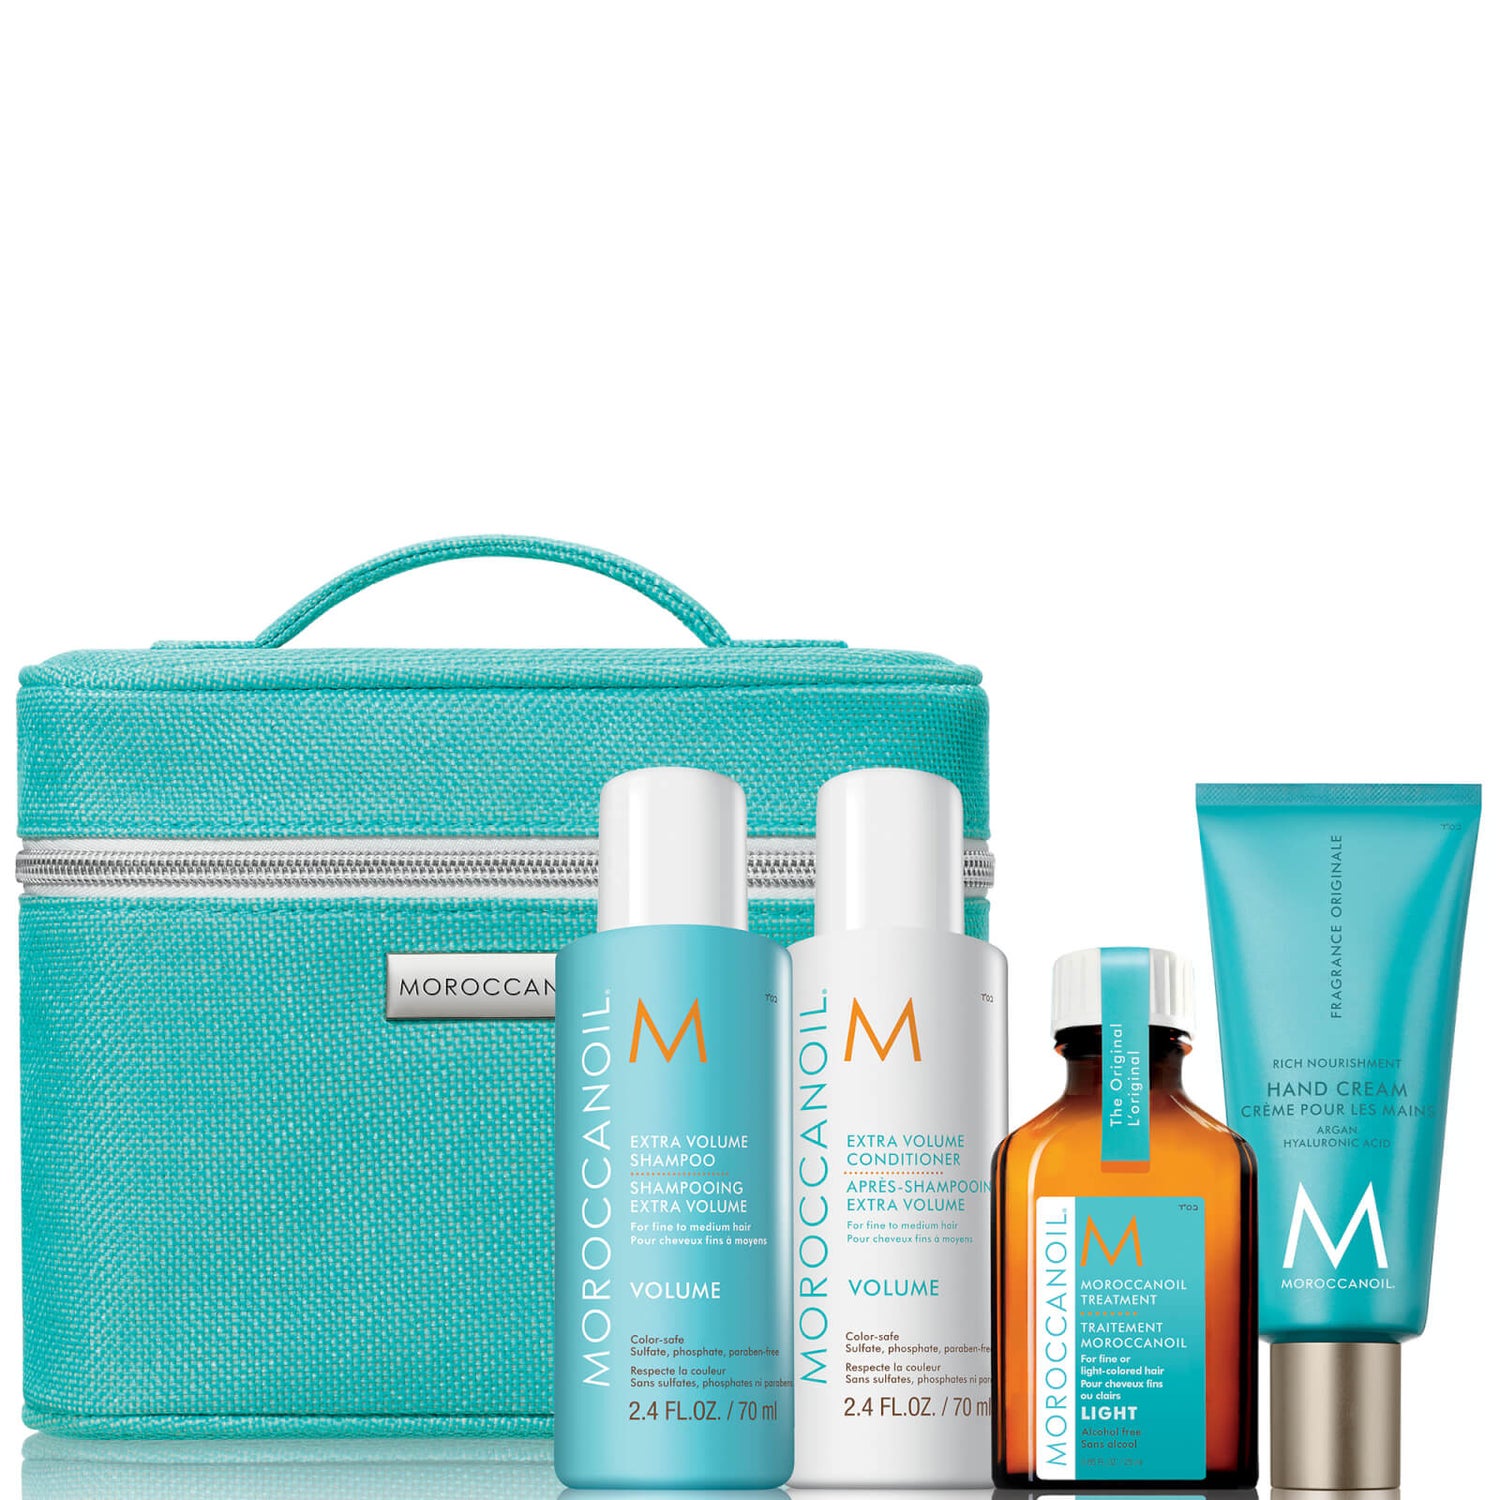 Moroccanoil Extra Volume Discovery Kit (Worth £38.75)